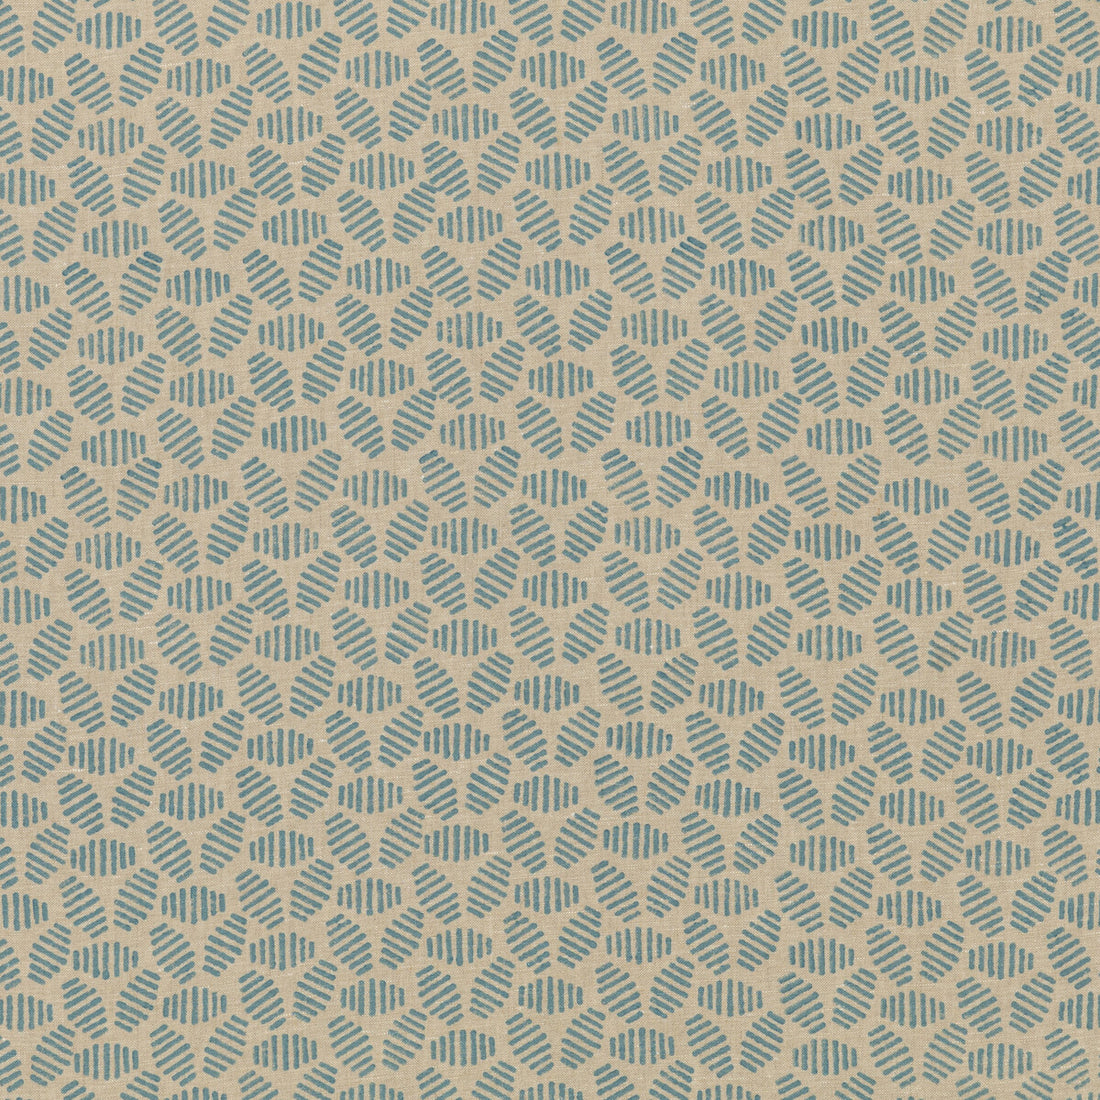 Bumble Bee fabric in soft blue color - pattern PP50482.7.0 - by Baker Lifestyle in the Block Party collection